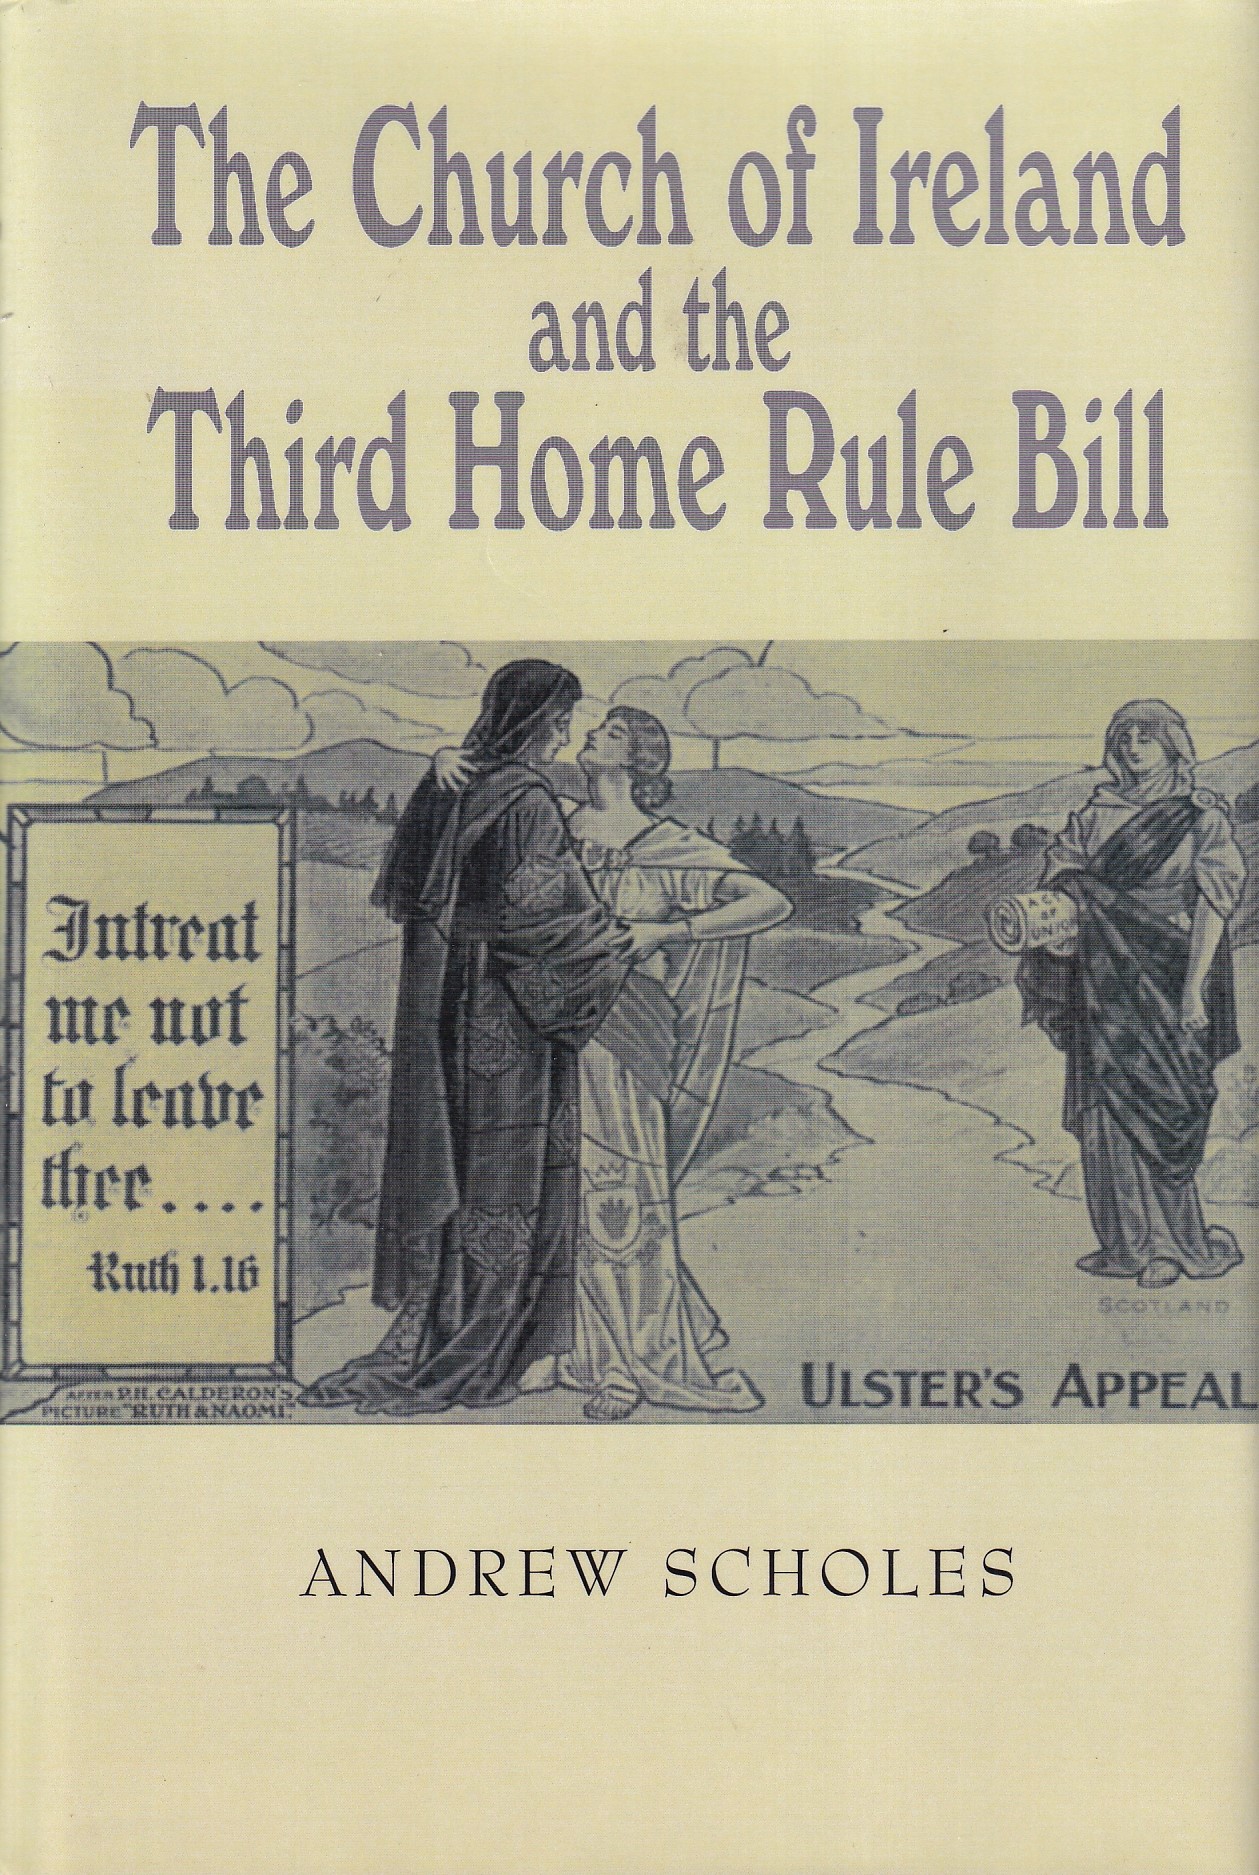 The Church of Ireland and the Third Home Rule Bill | Andrew Scholes | Charlie Byrne's